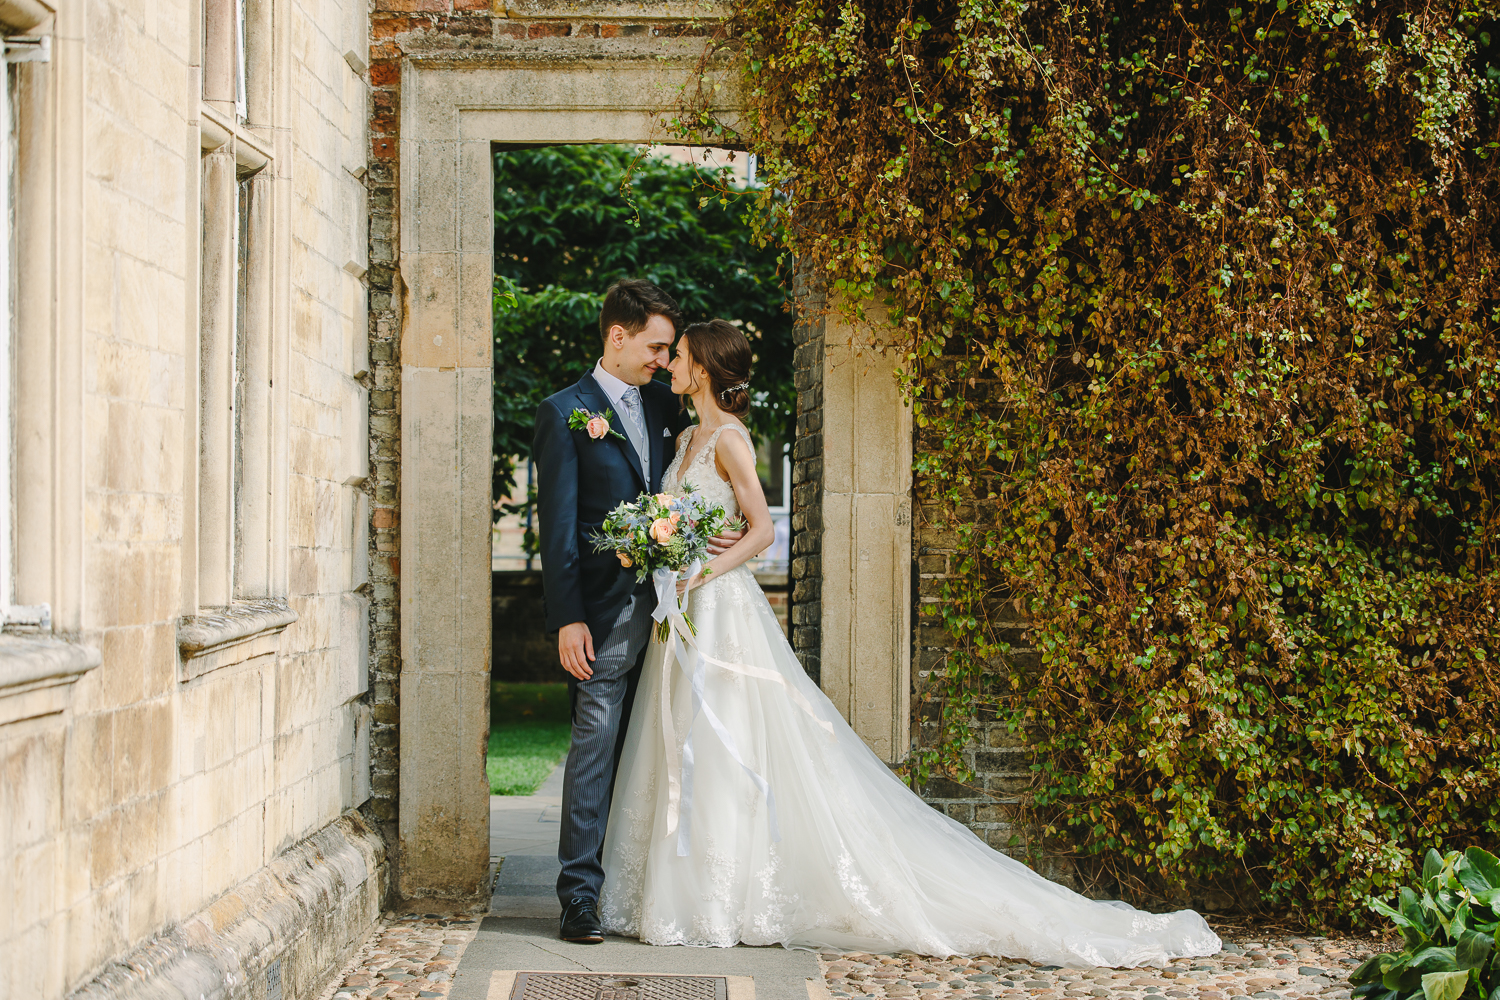 Bride and groom portrait in an archway at Magdalene College Cambridge University